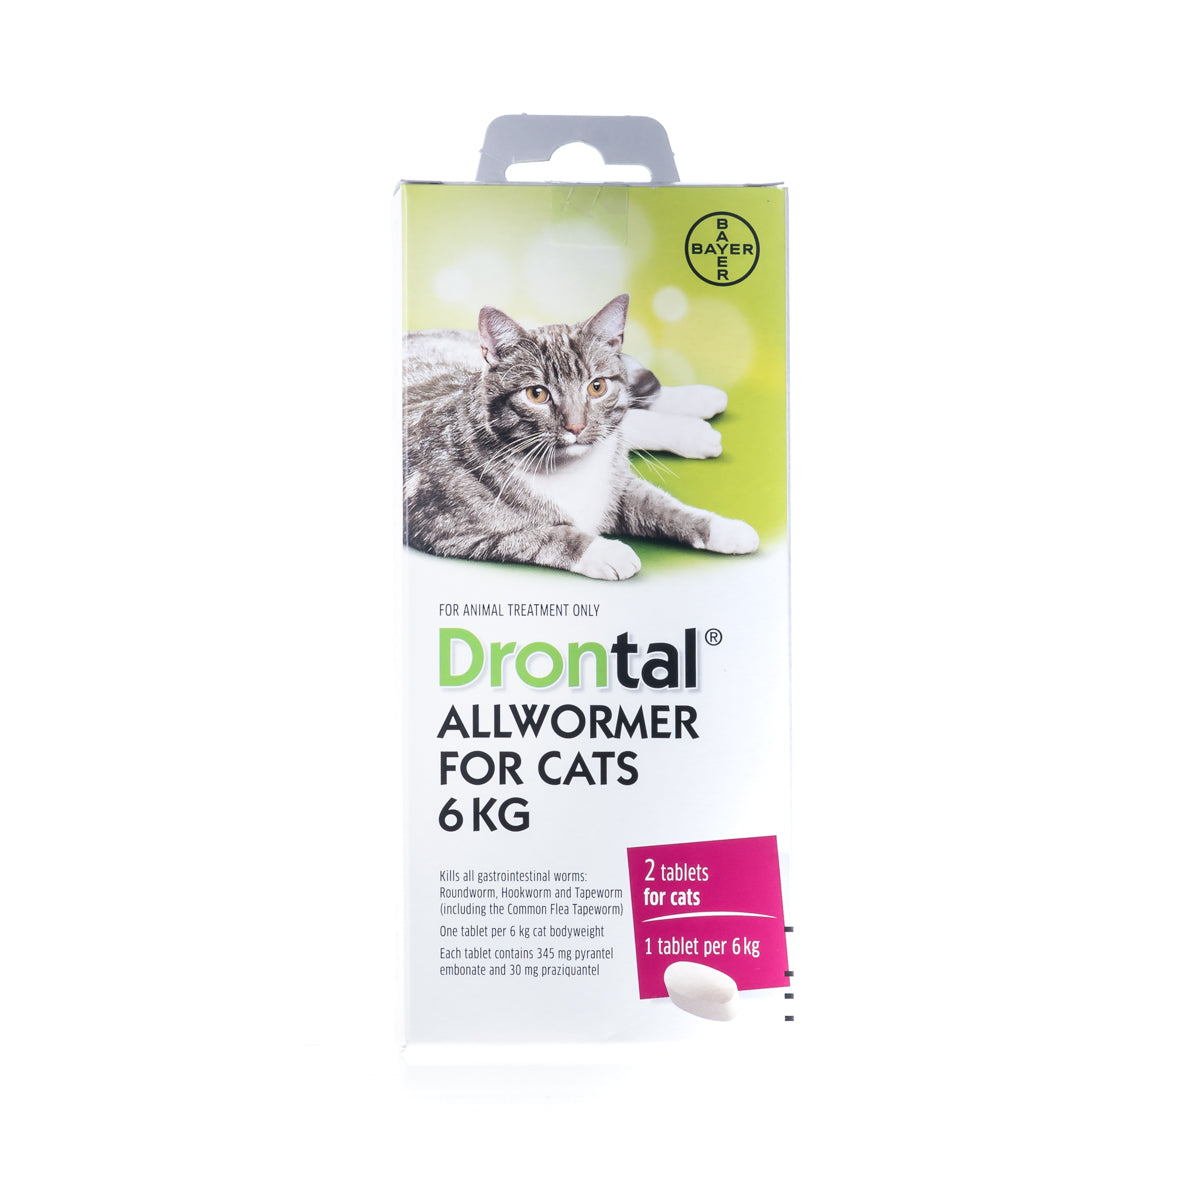 Drontal All wormer For Cats